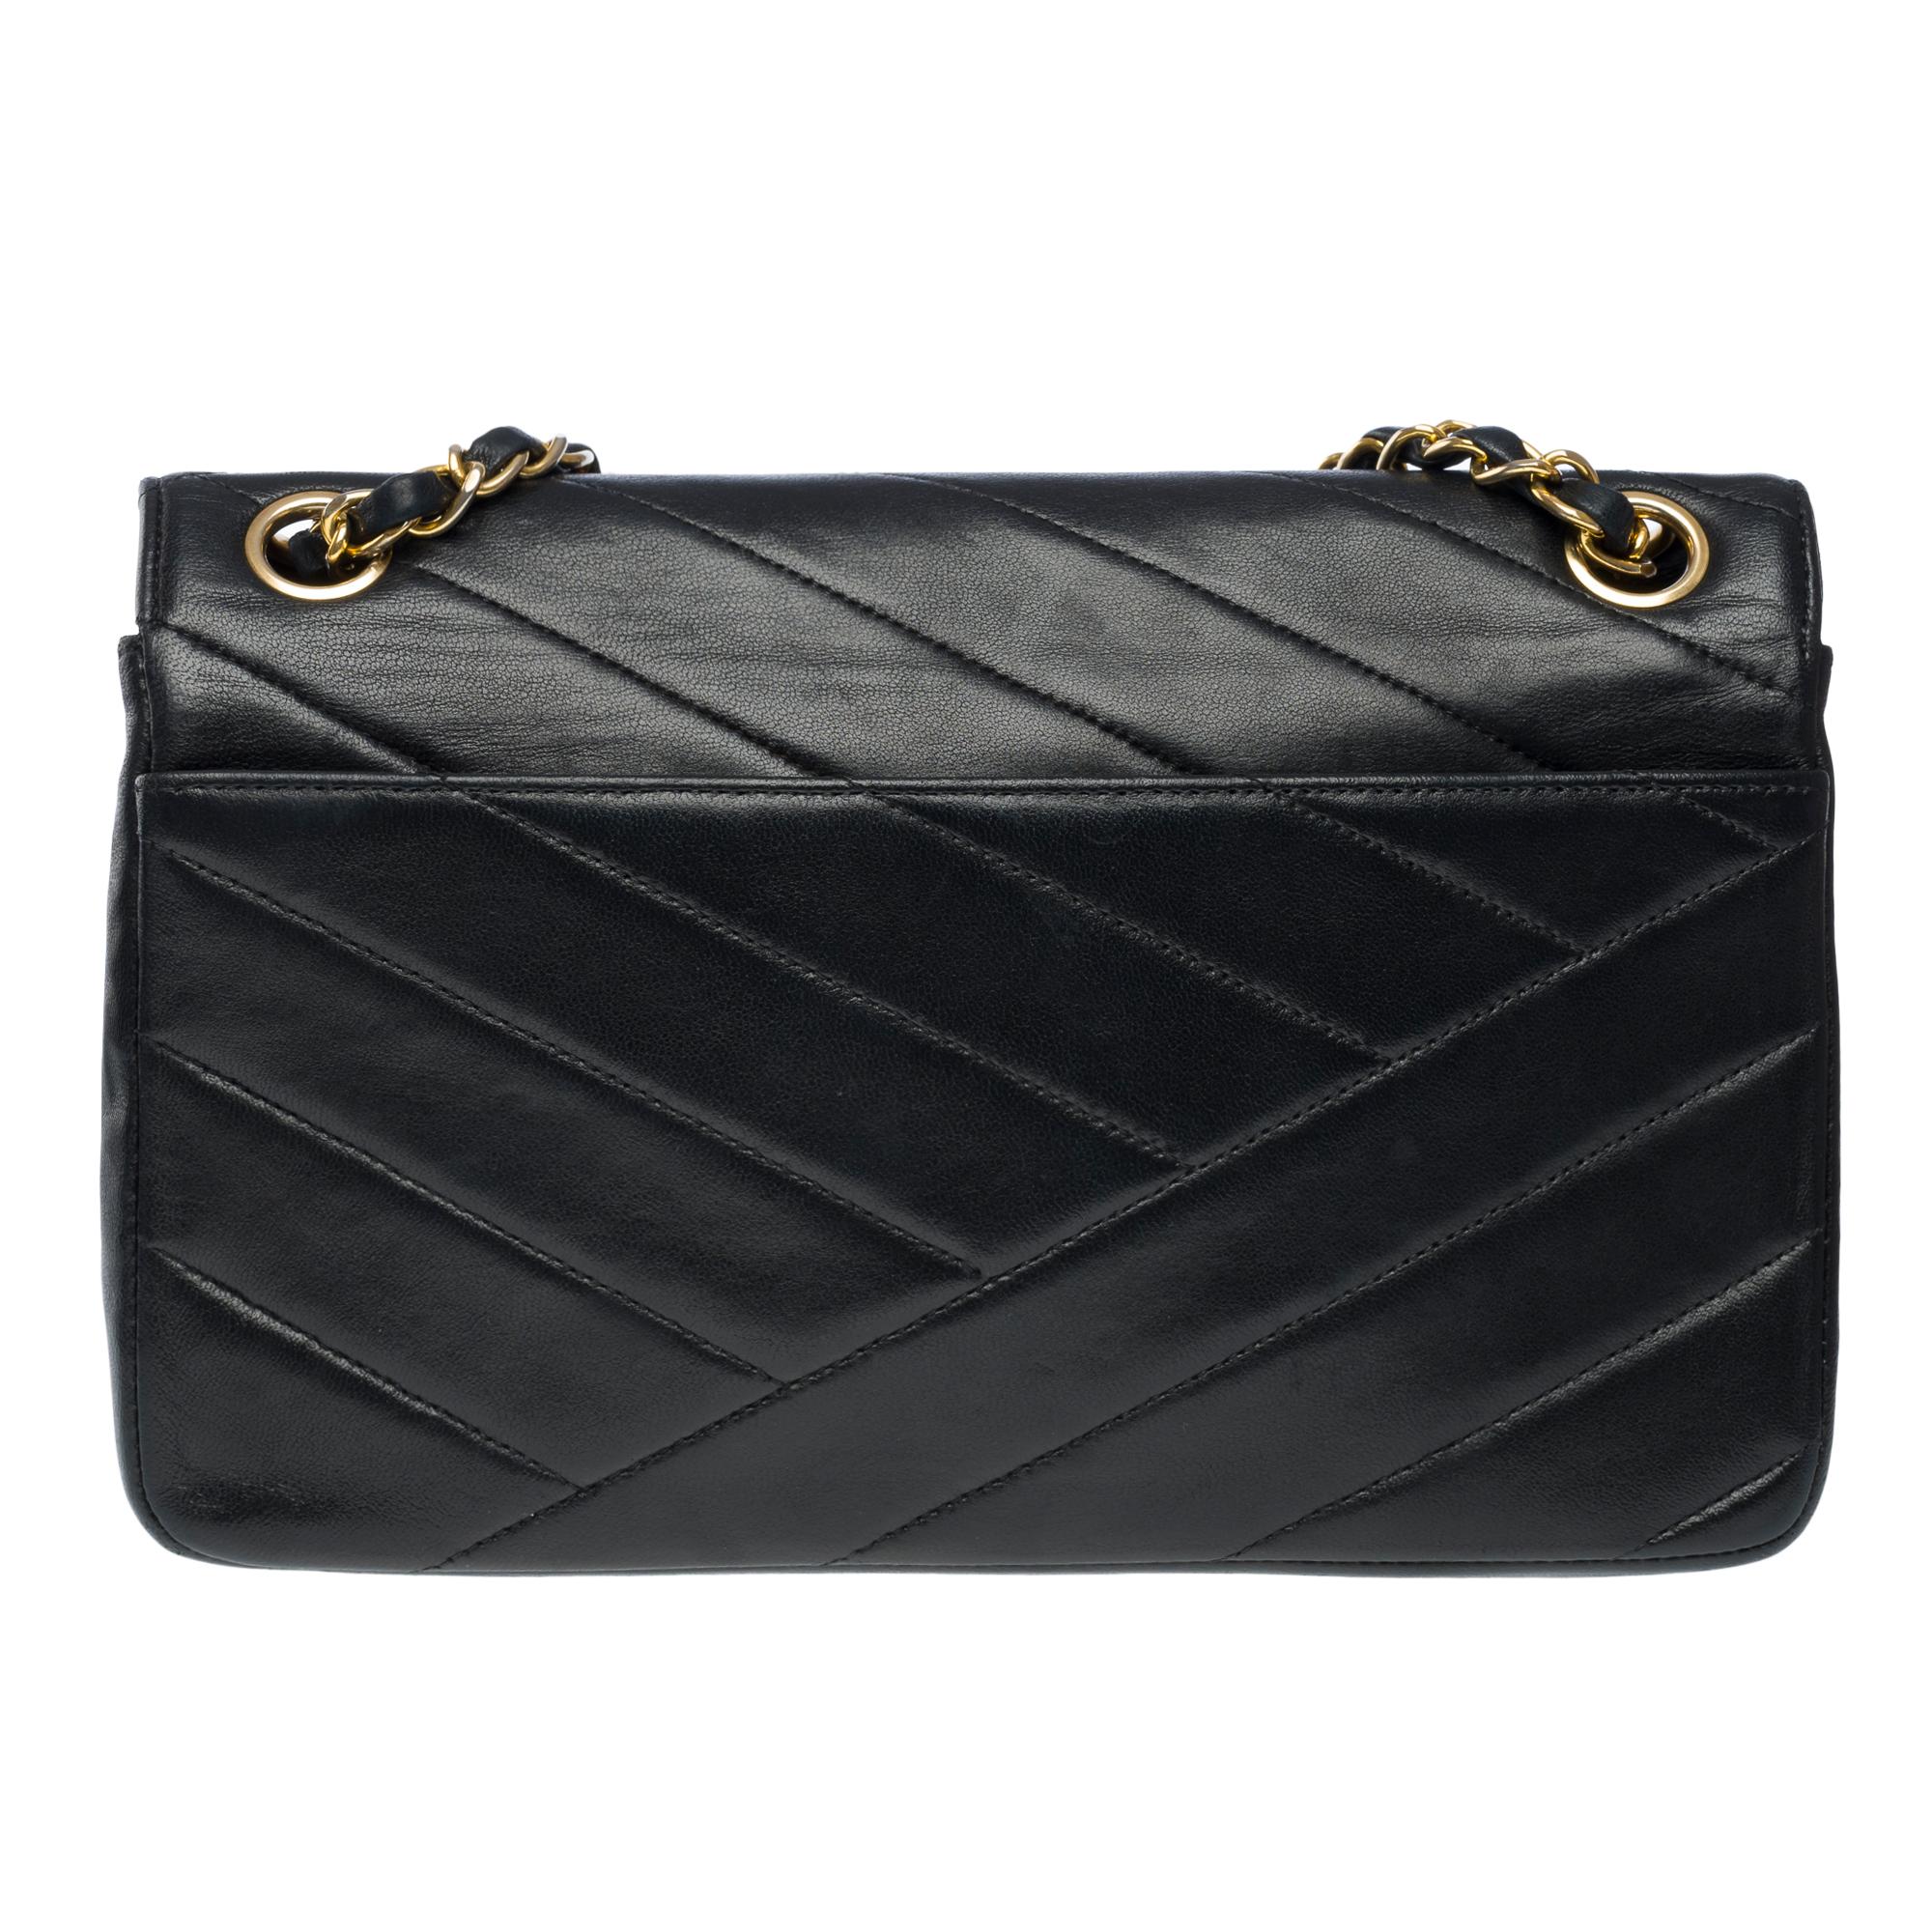 Women's Chanel Classic shoulder flap bag in black herringbone quilted lamb leather, GHW